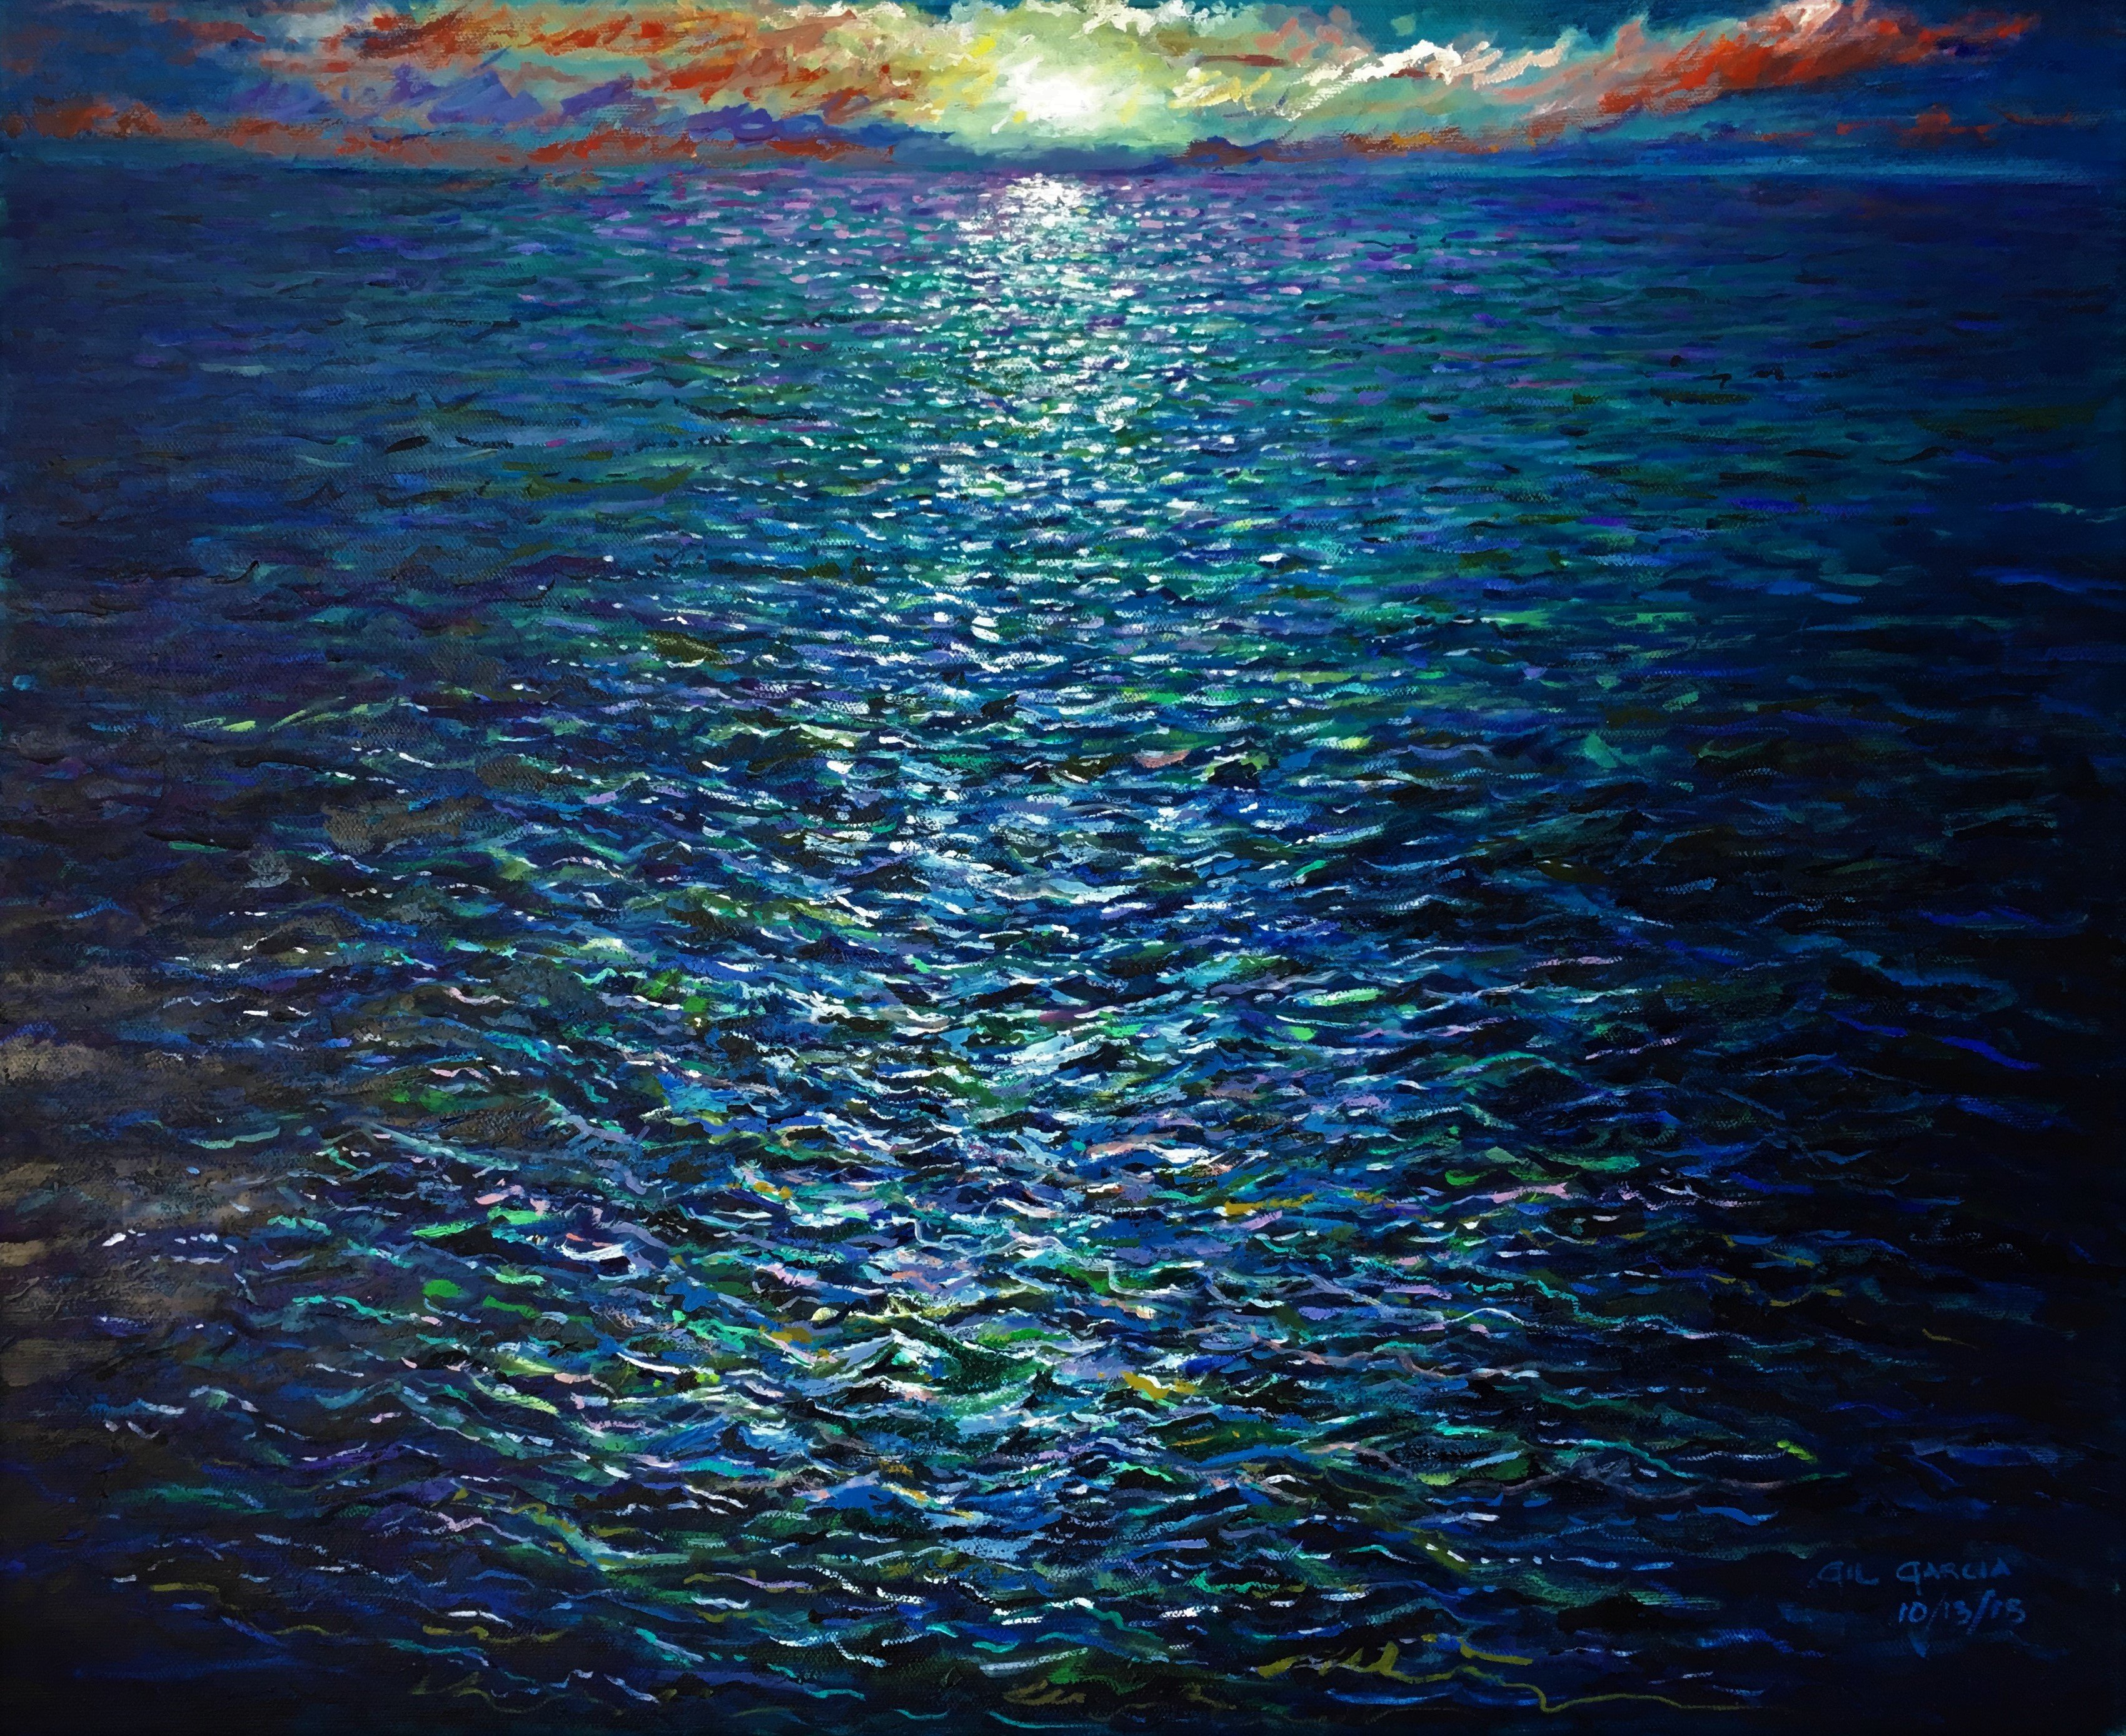 Gil Garcia; Deep Ocean Sunset, 2019, Original Painting Oil, 20 x 16 inches. Artwork description: 241 An impressionistic look at a Deep Ocean Sunset in blues, whites, and greens. ...